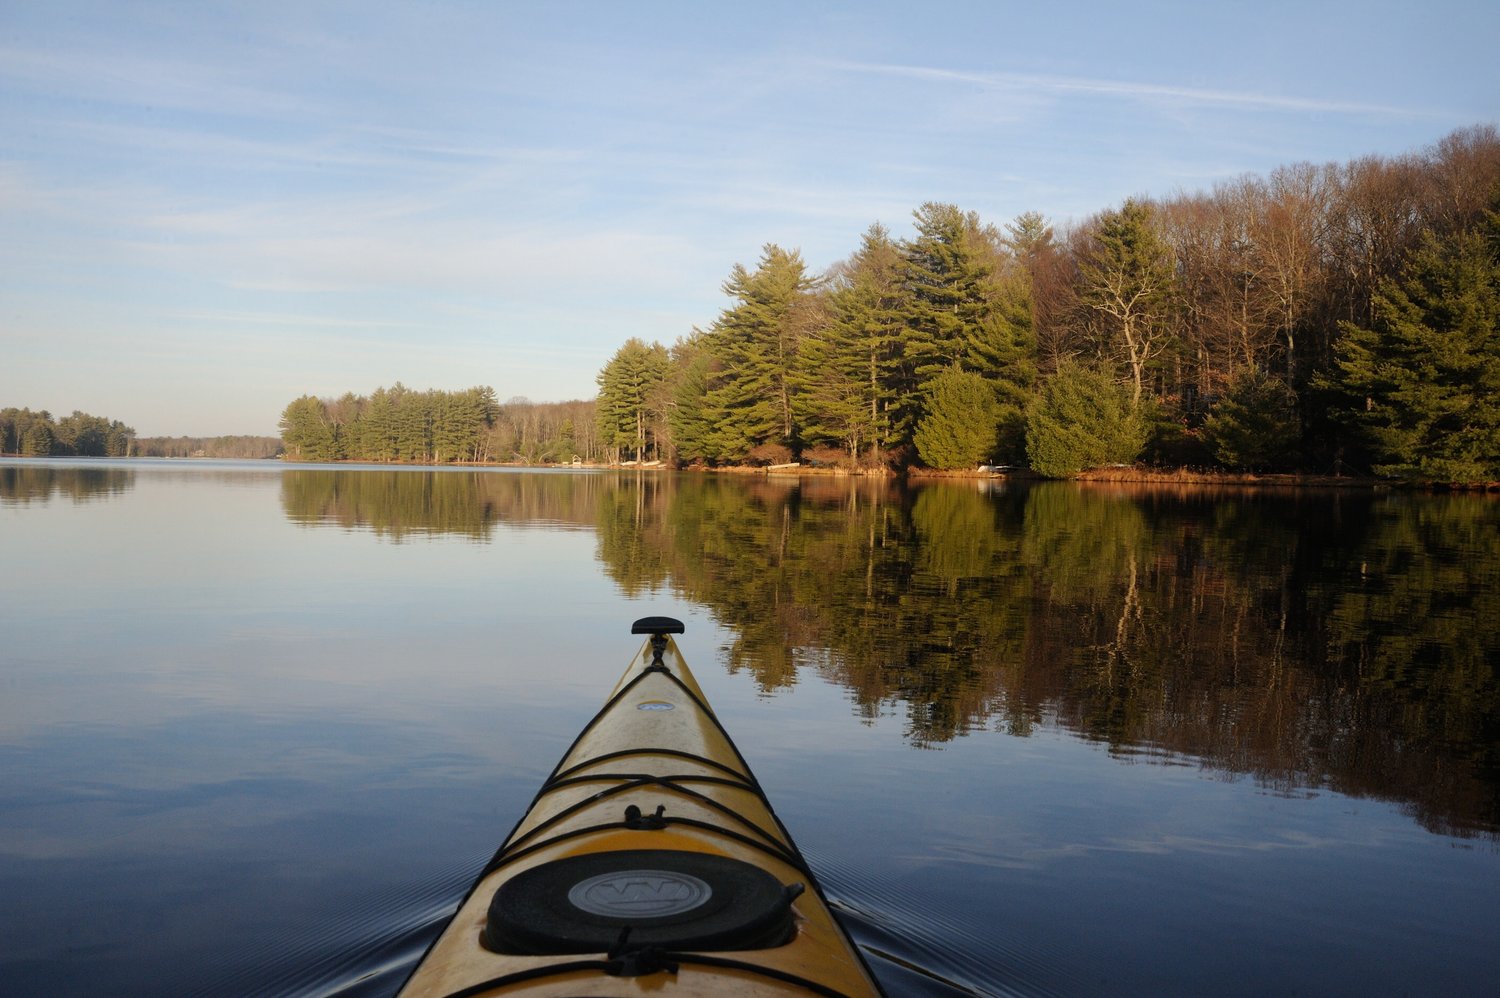 Kayaking is a great way to practice social distancing while enjoying what nature has to offer. It is spring; birds and frogs will be calling. Look for some spring migrants and listen for the spring peepers near the wetlands.